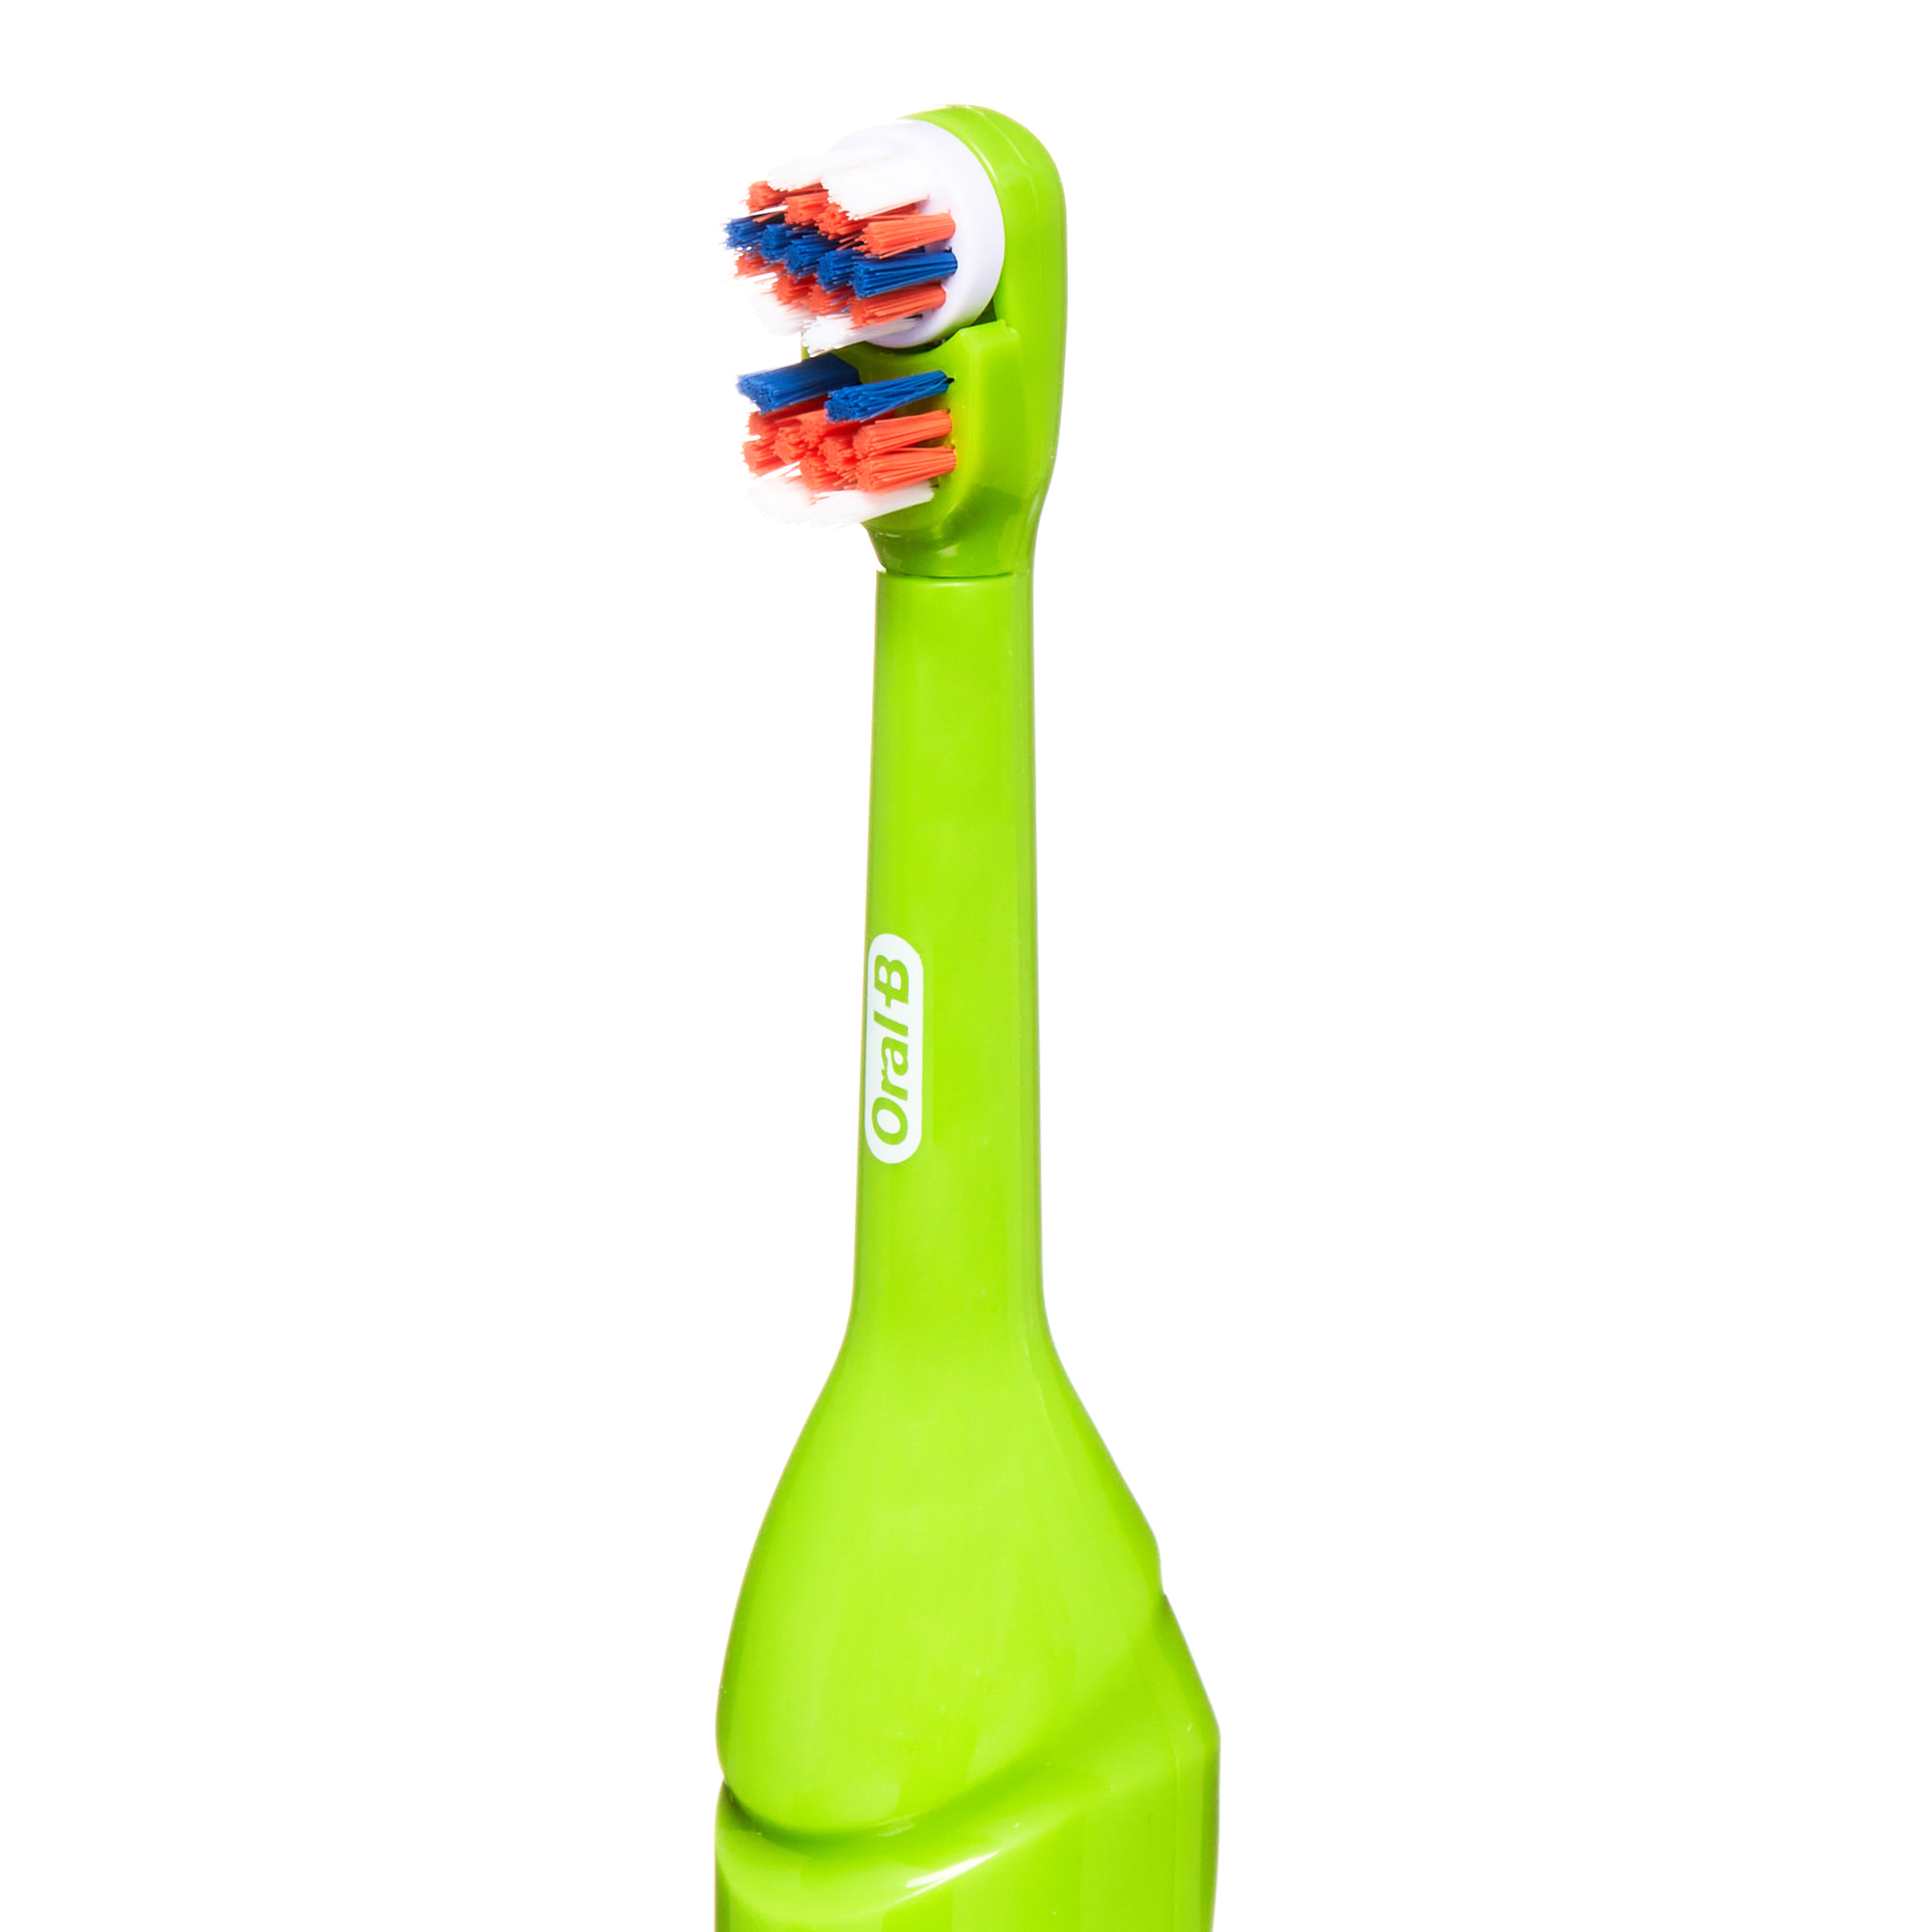 Oral-B Kid's Battery Toothbrush Featuring Lucasfilm's Mandalorian, Full Head, Soft, for Children 3+ - image 5 of 8